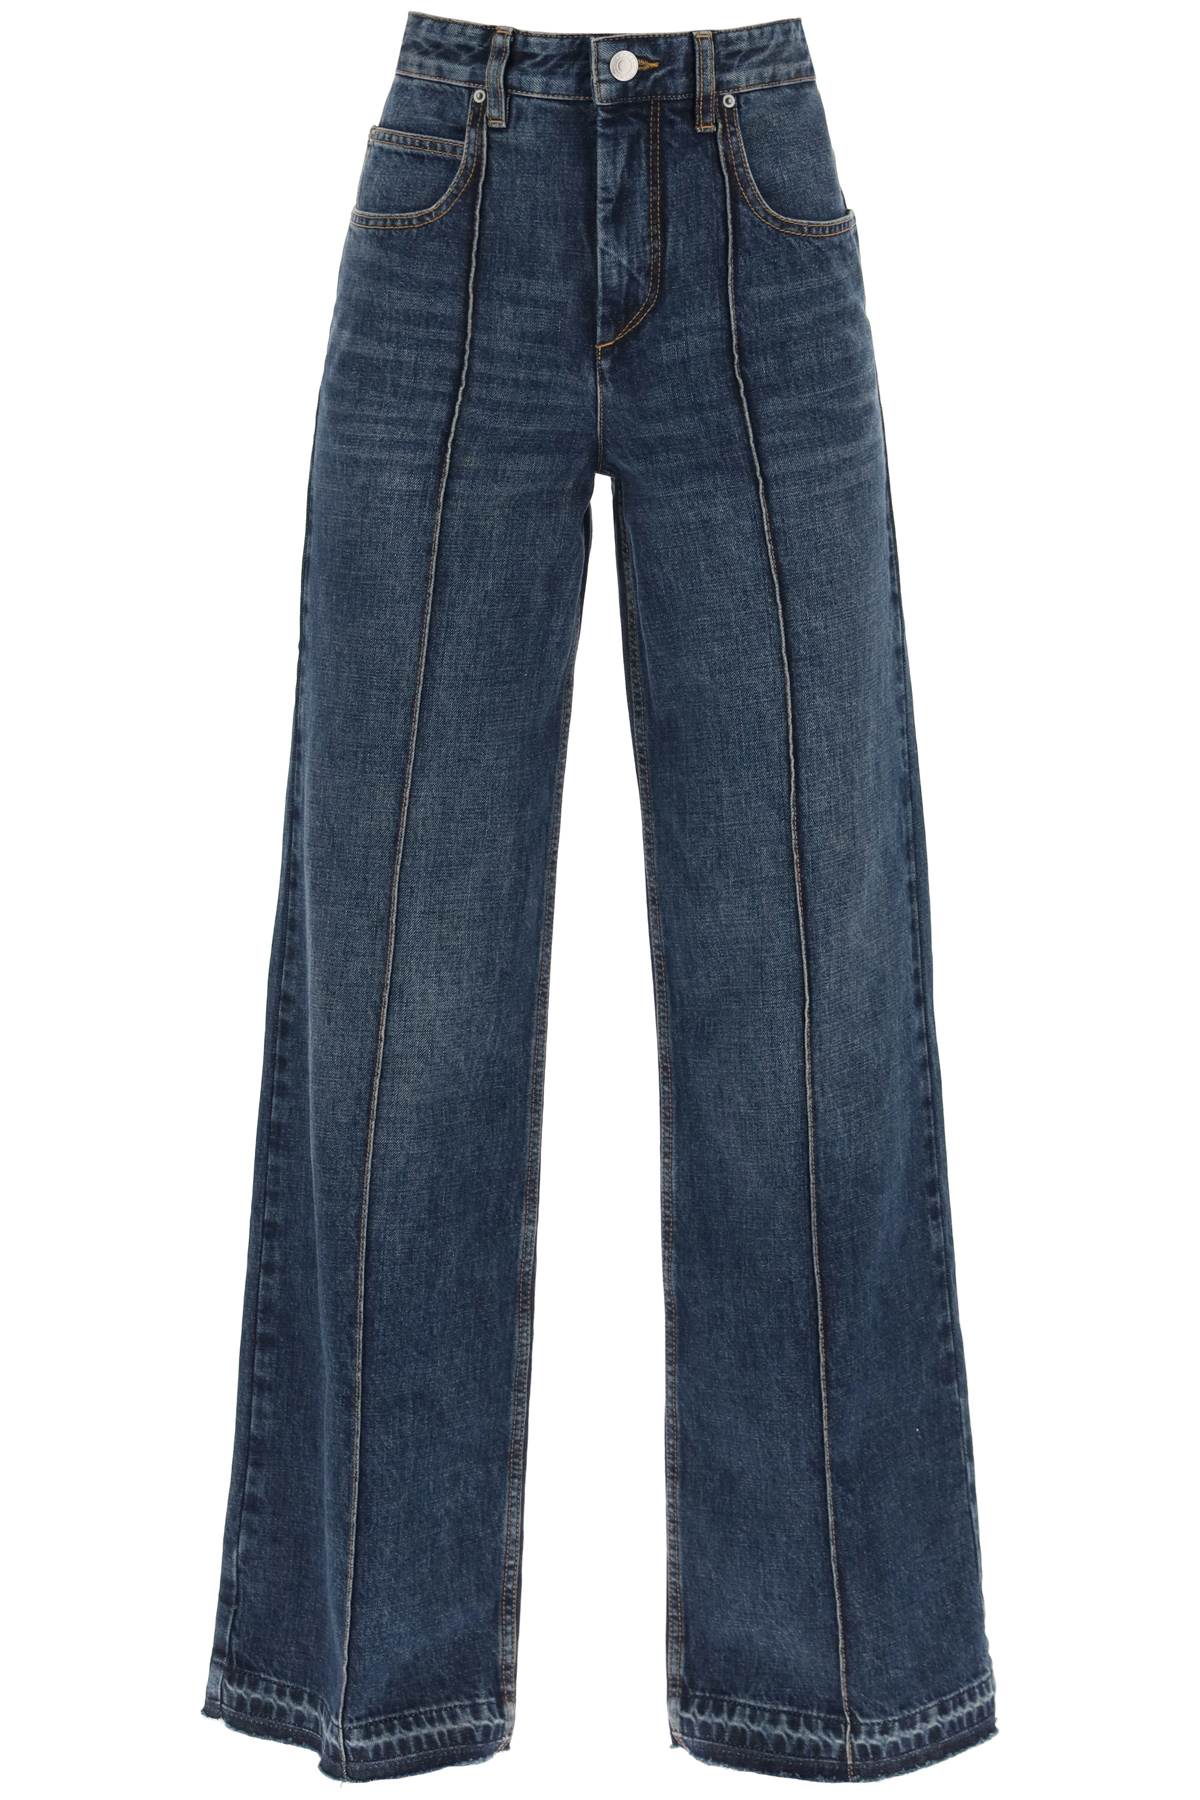 Isabel marant noldy flared jeans-0